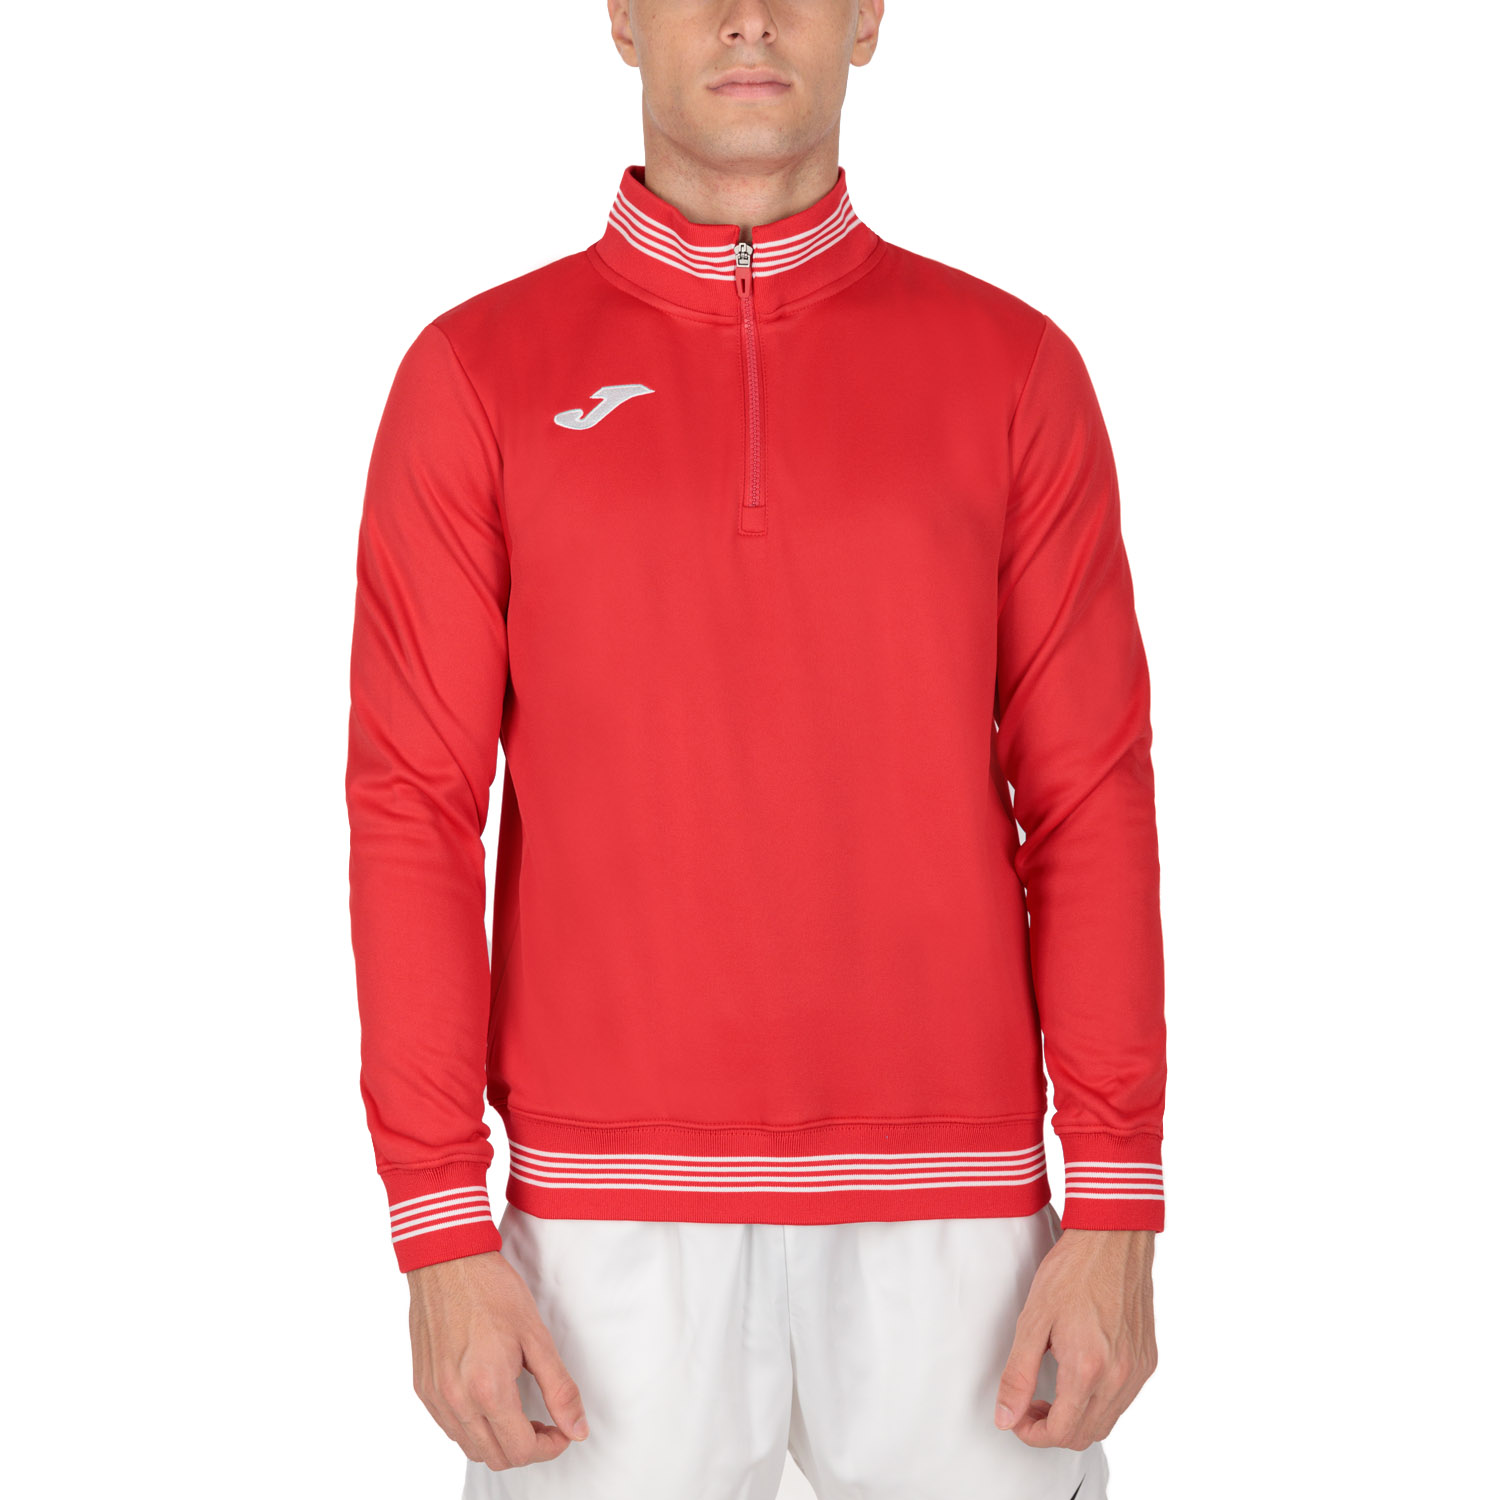 Joma Campus III Camisa - Red